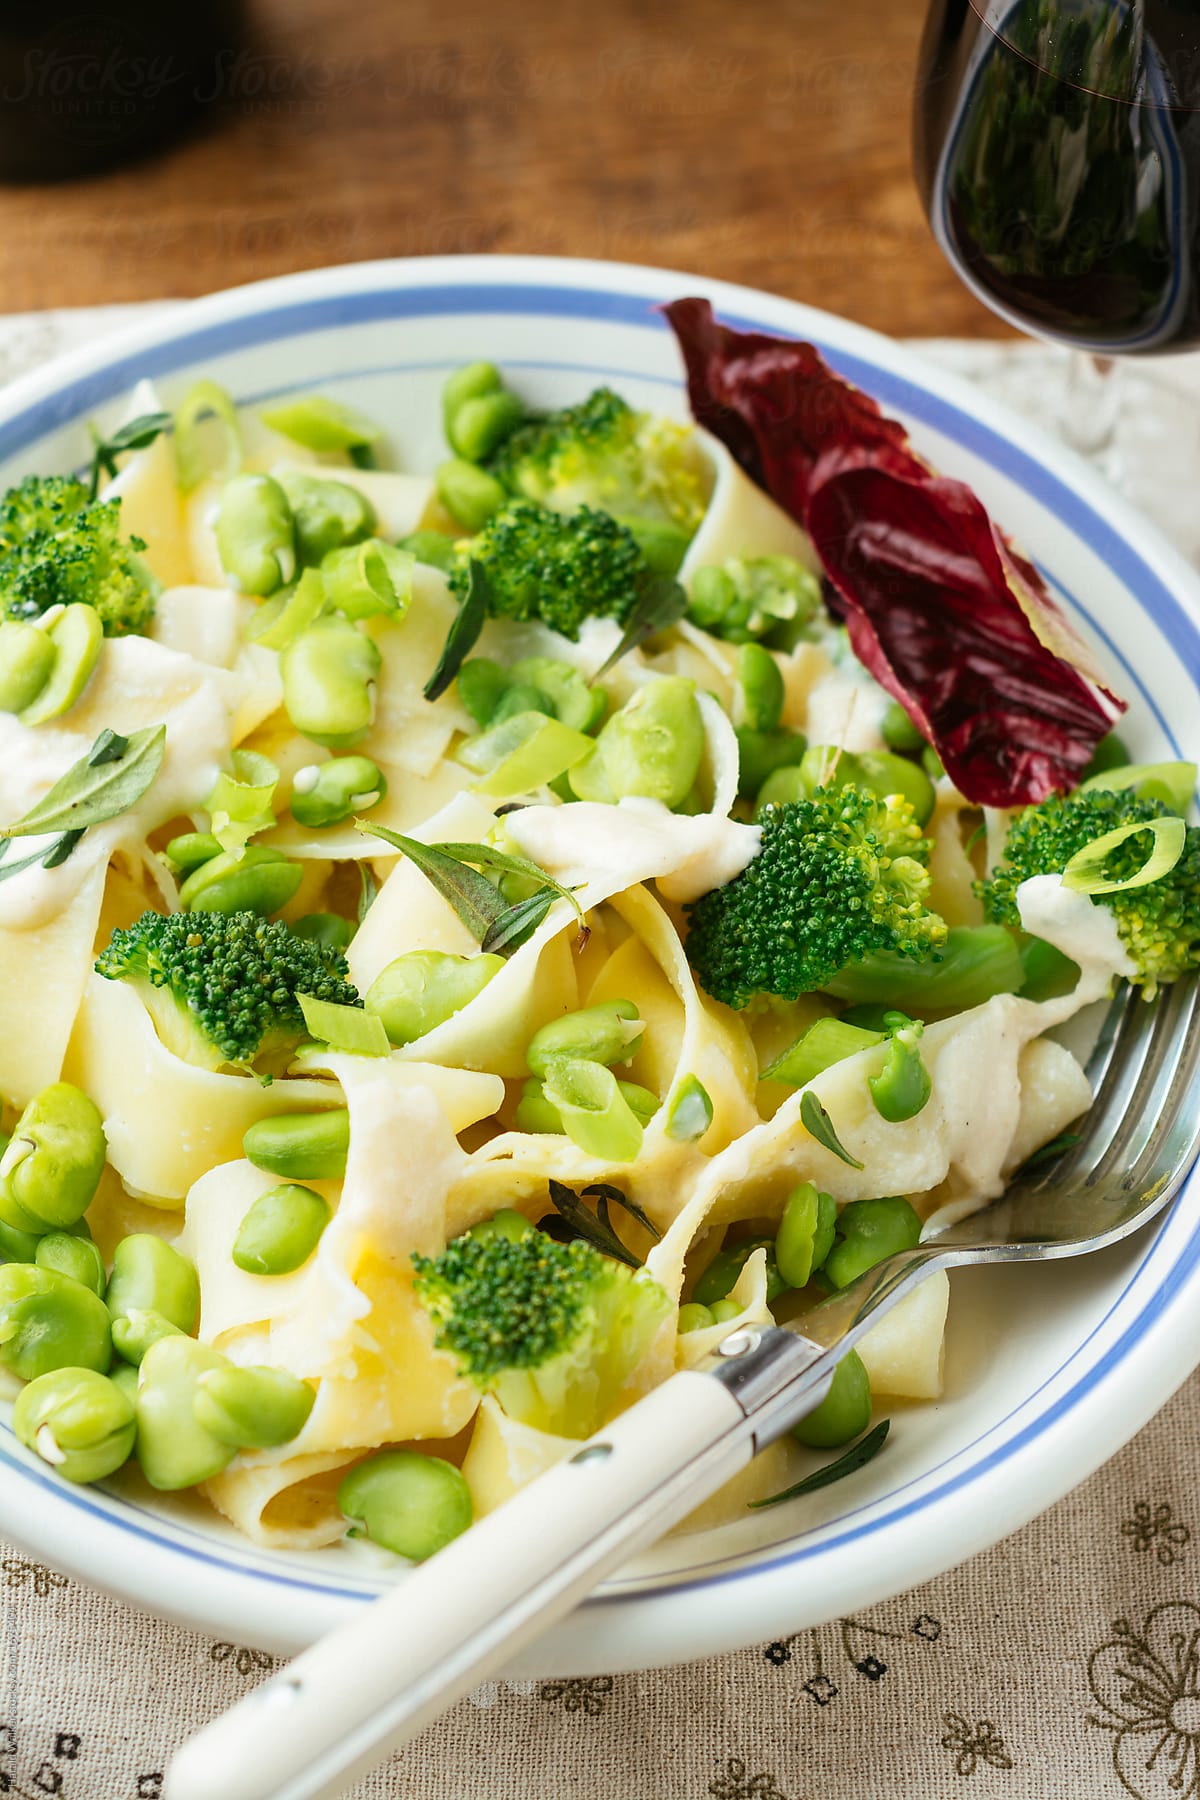 Pappardelle with fava beans and broccoli